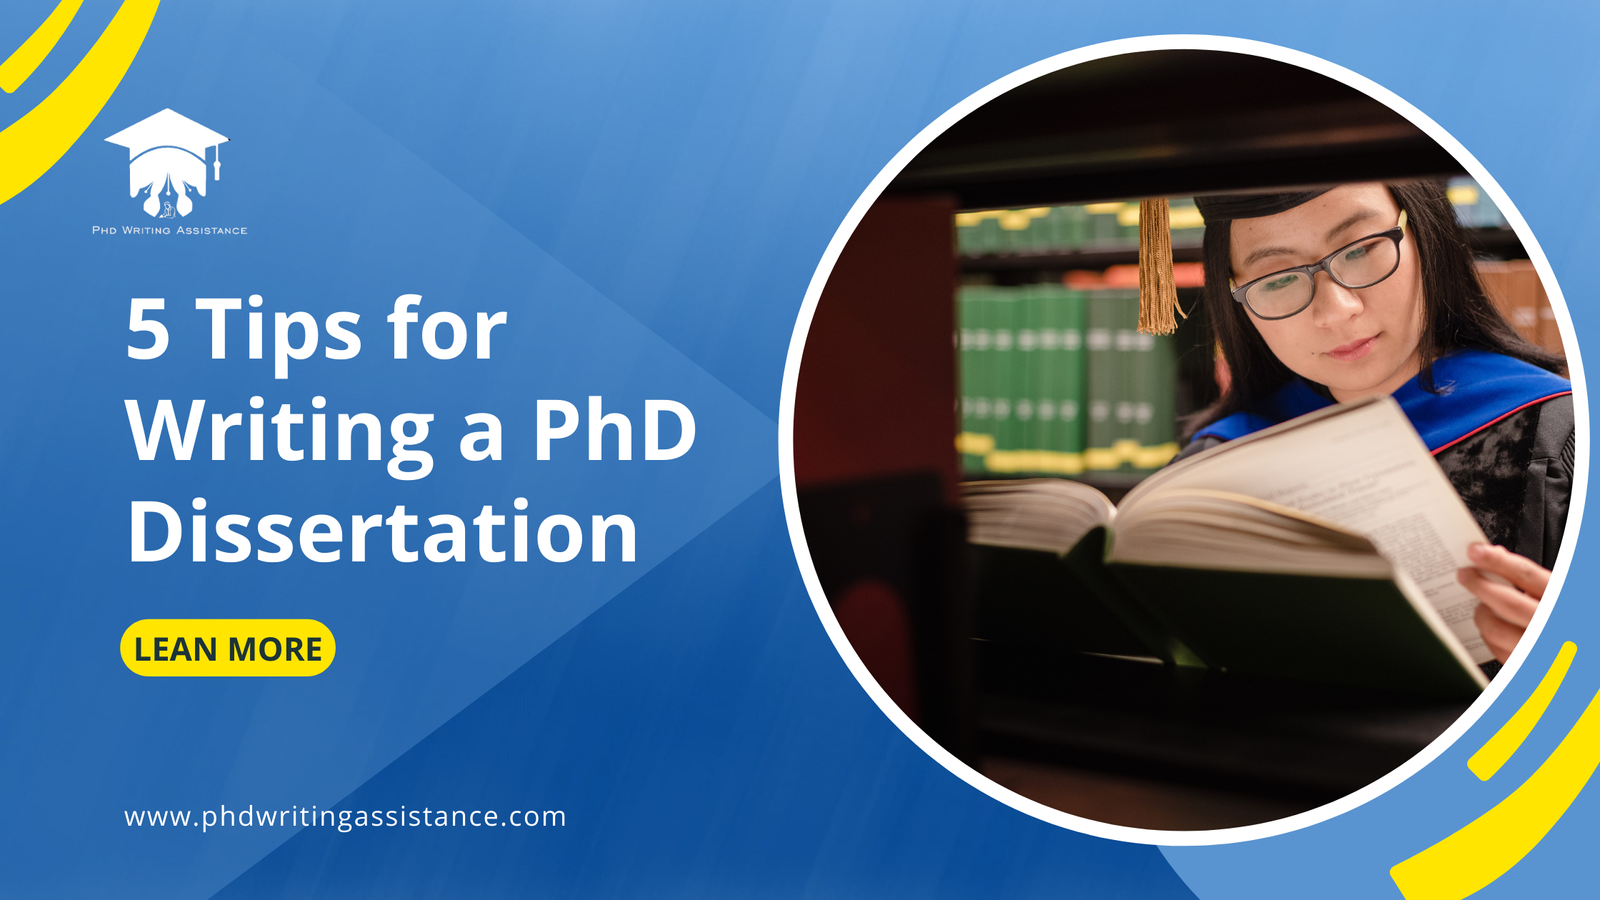 5 Tips for Writing a PhD Dissertation